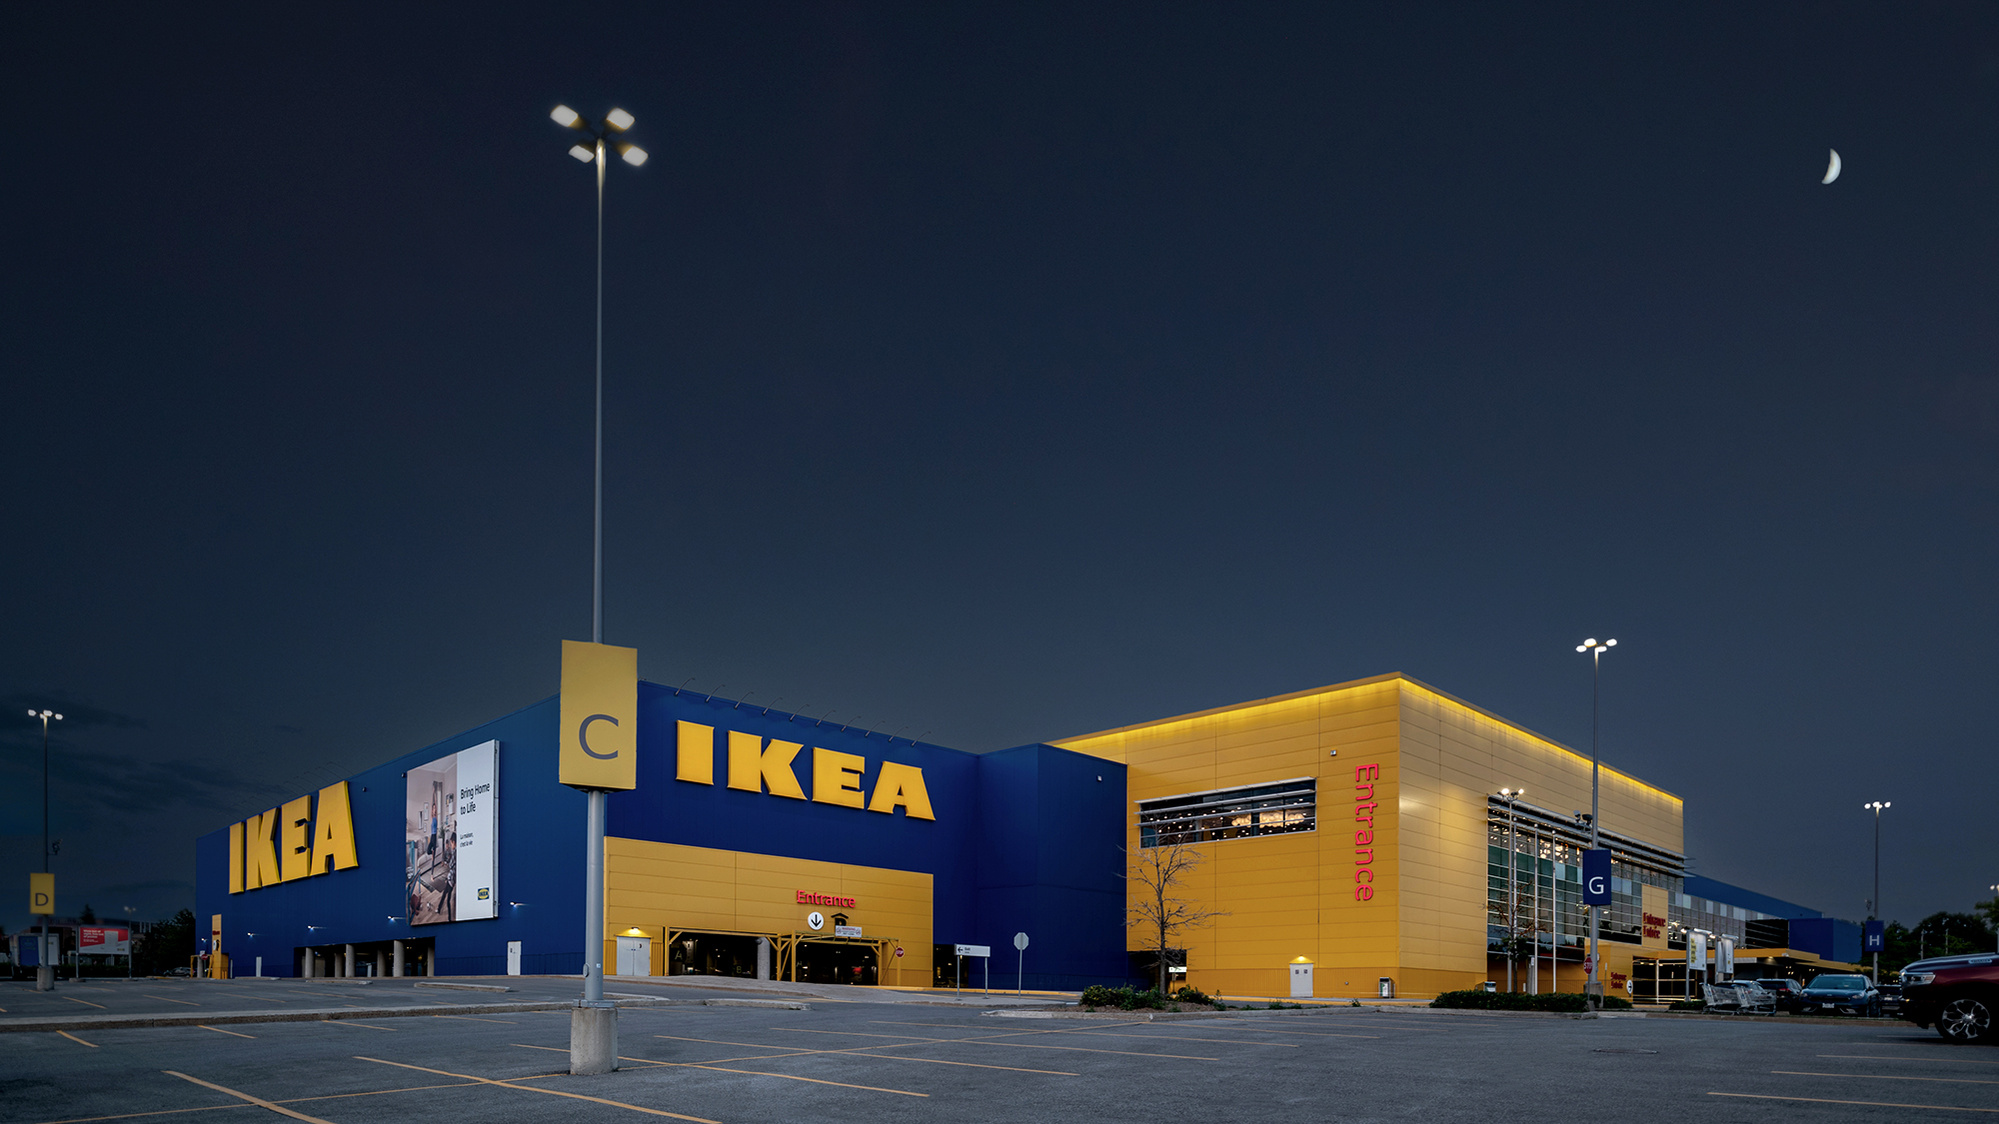 IKEA OTTAWA photographed and edited by Frank Fenn IDEA3 Architectural Photographer